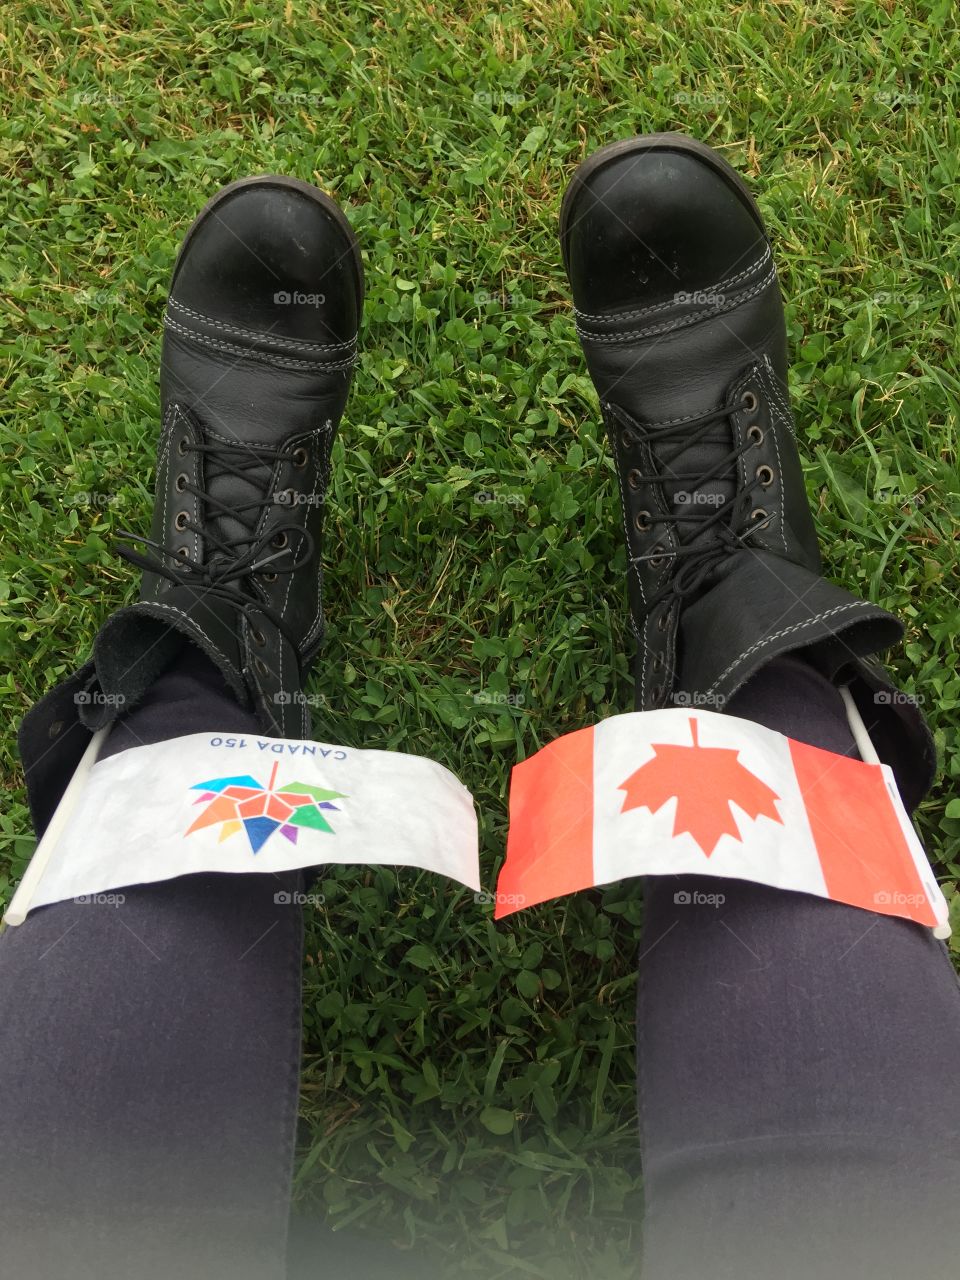 Happy Canada Day (my favourite boots)